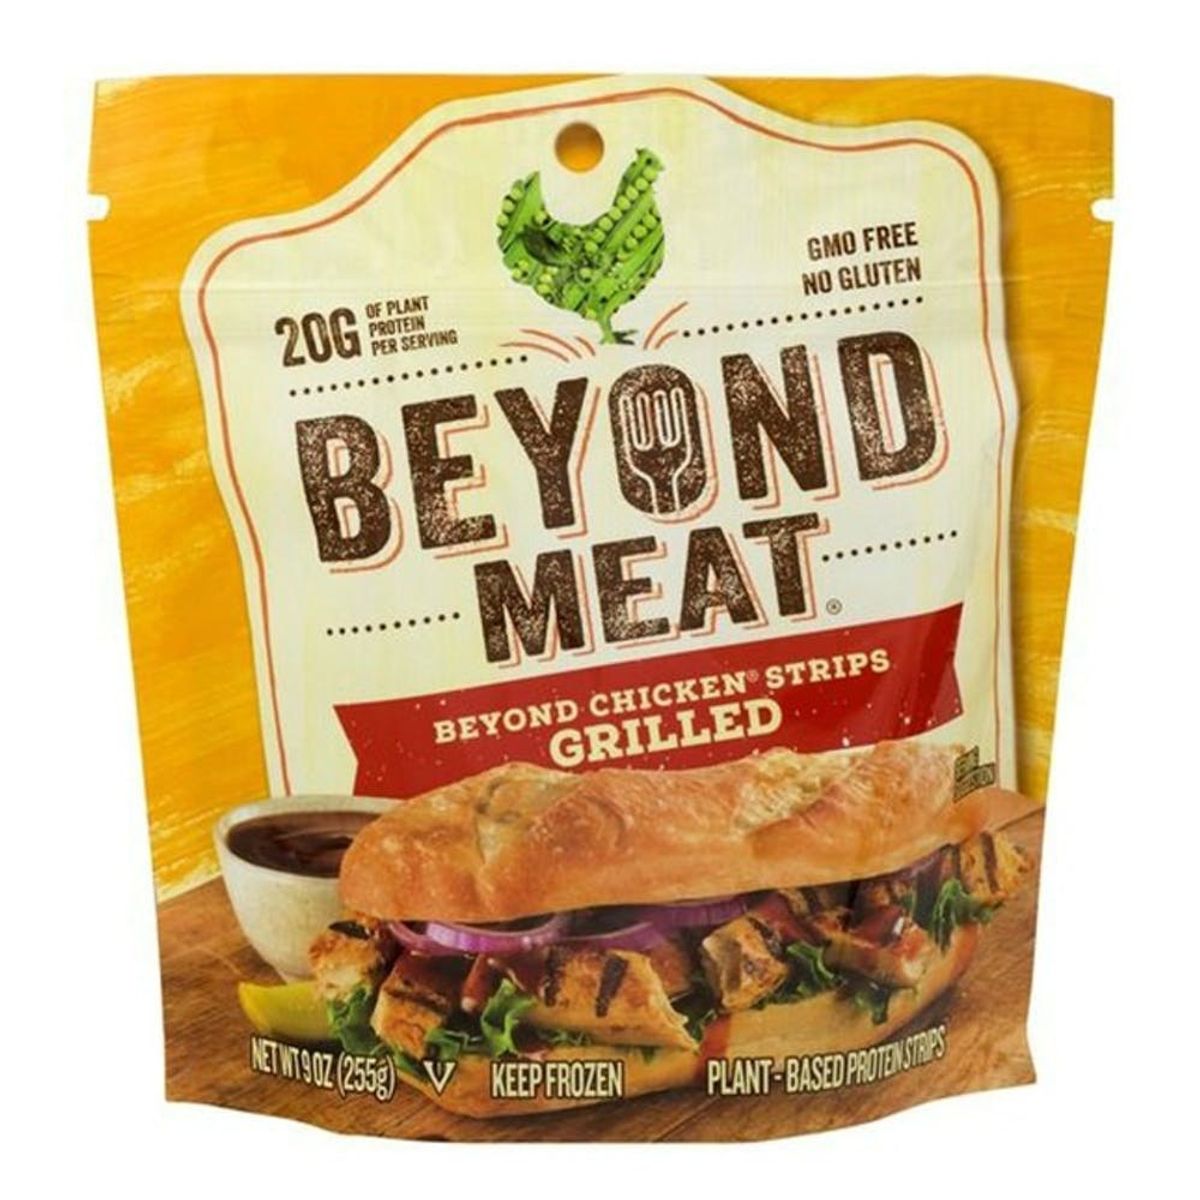 Package of Beyond Meat highlights our round up of the best veggie meat alternatives.